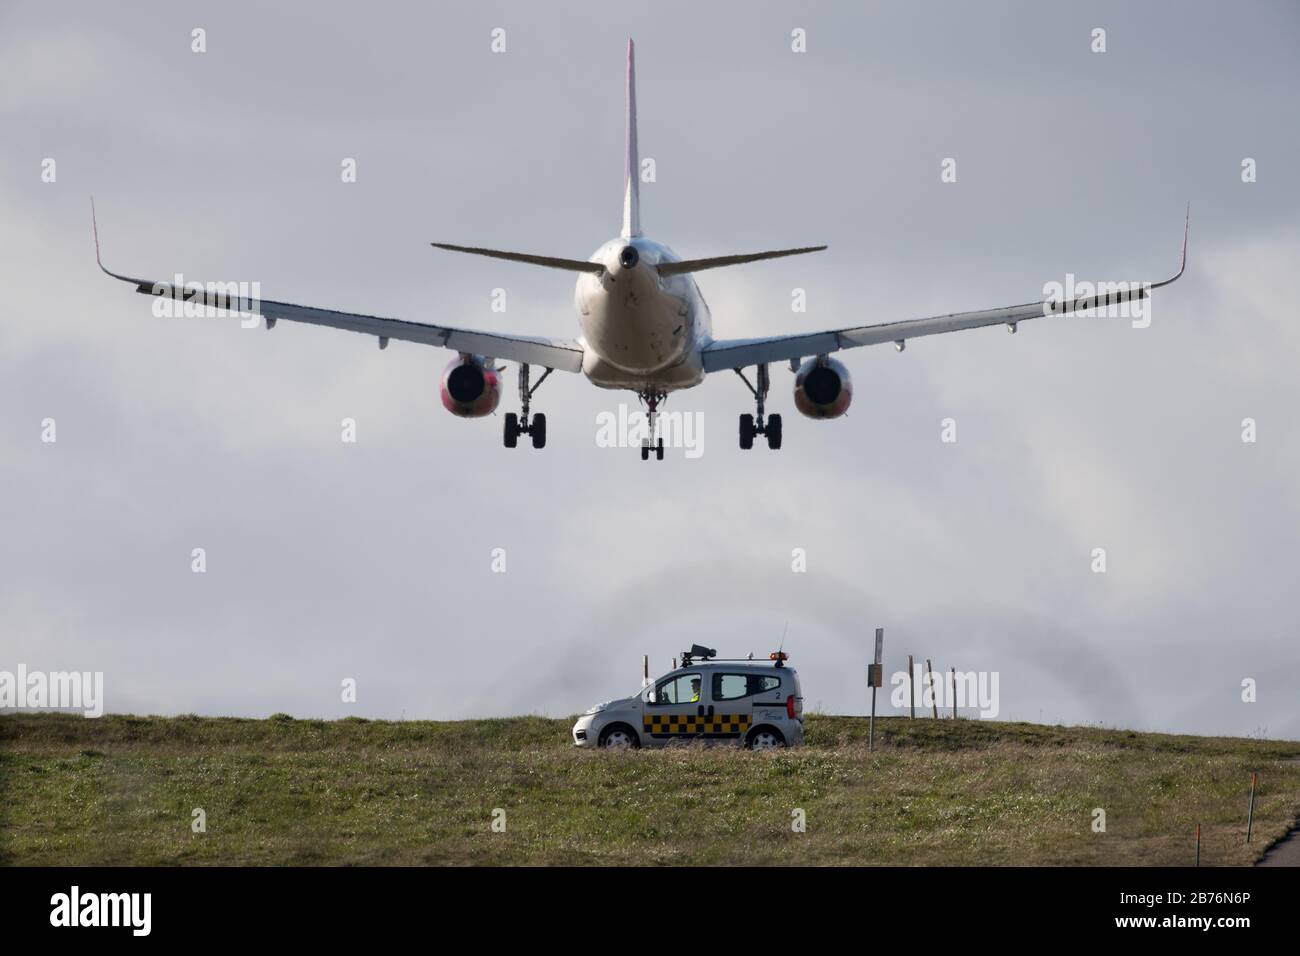 Low cost airline Wizz Air aircraft Airbus A320-232 in Gdansk, Poland. March 11th 2020 © Wojciech Strozyk / Alamy Stock Photo Stock Photo